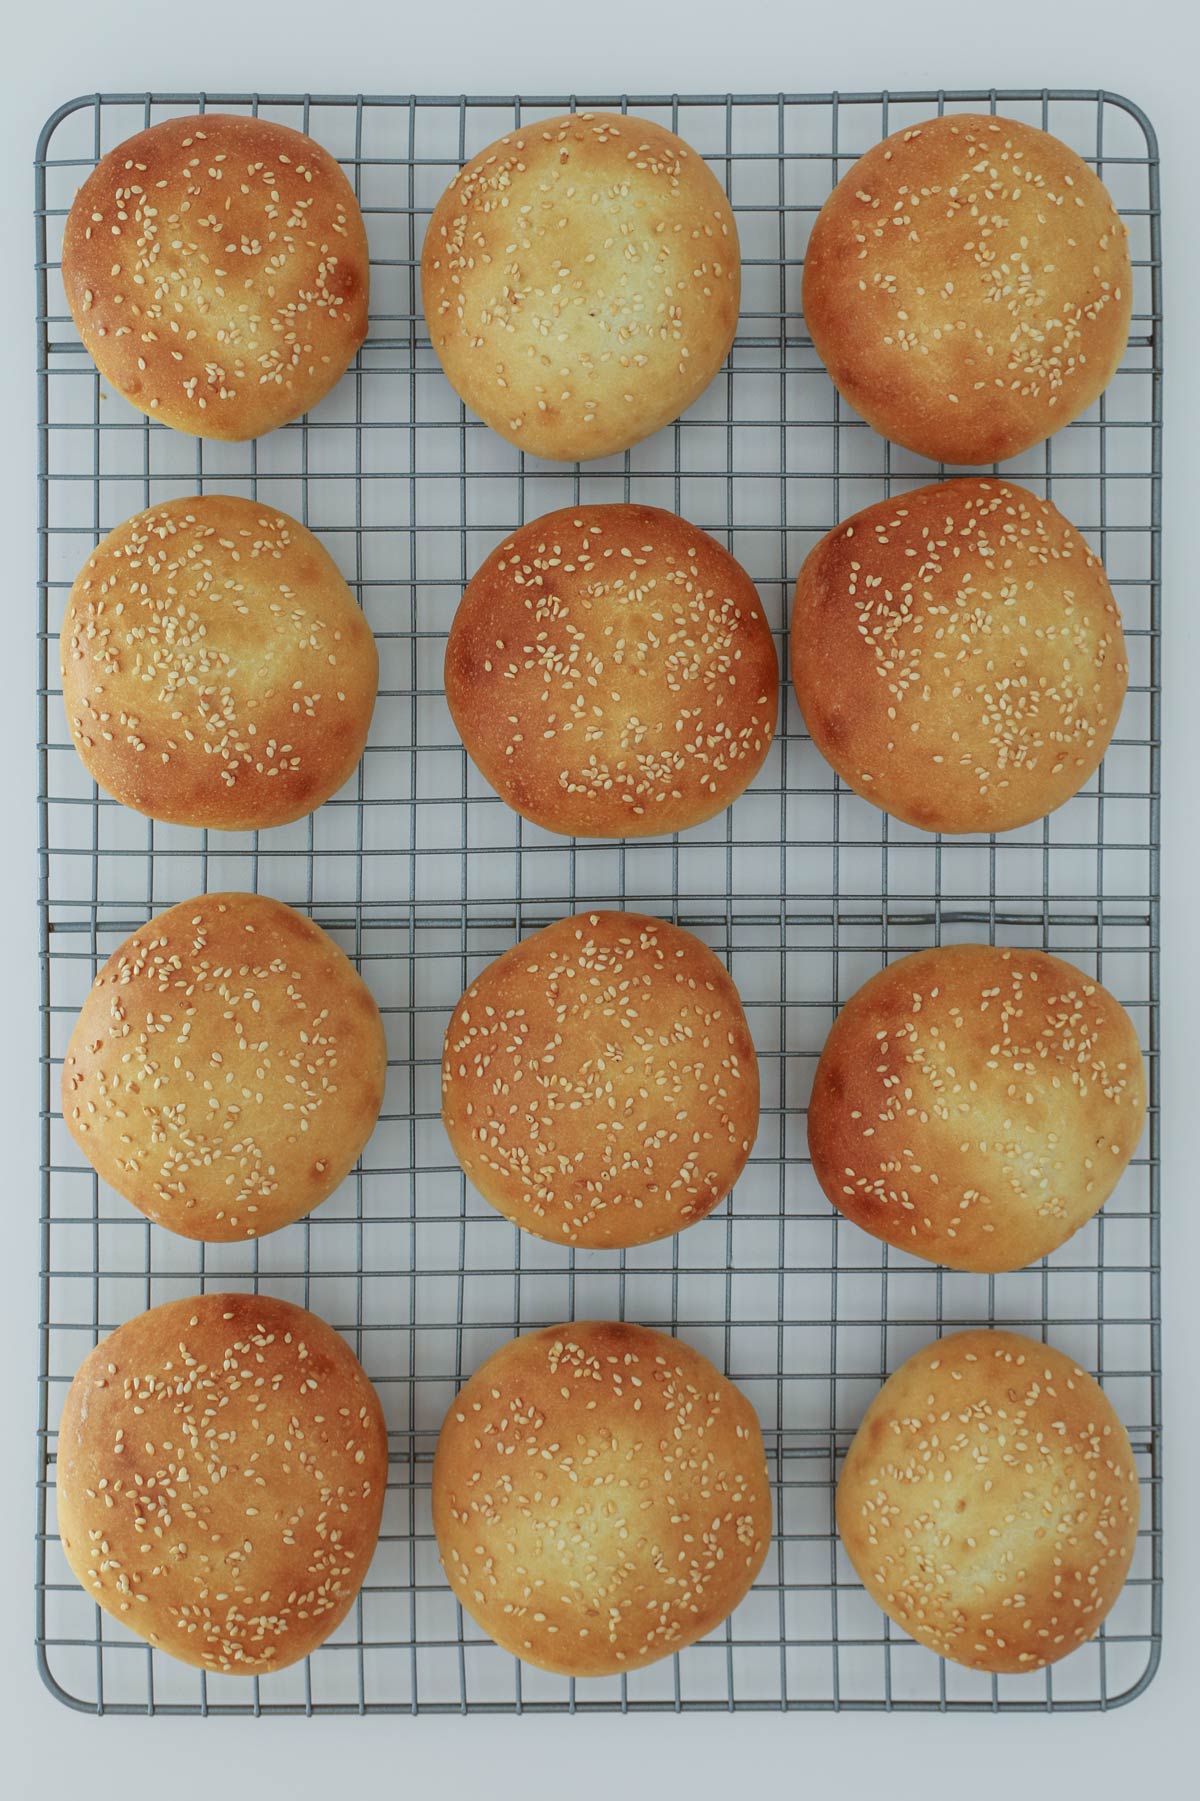 baked hamburger buns cooling on wire rack.